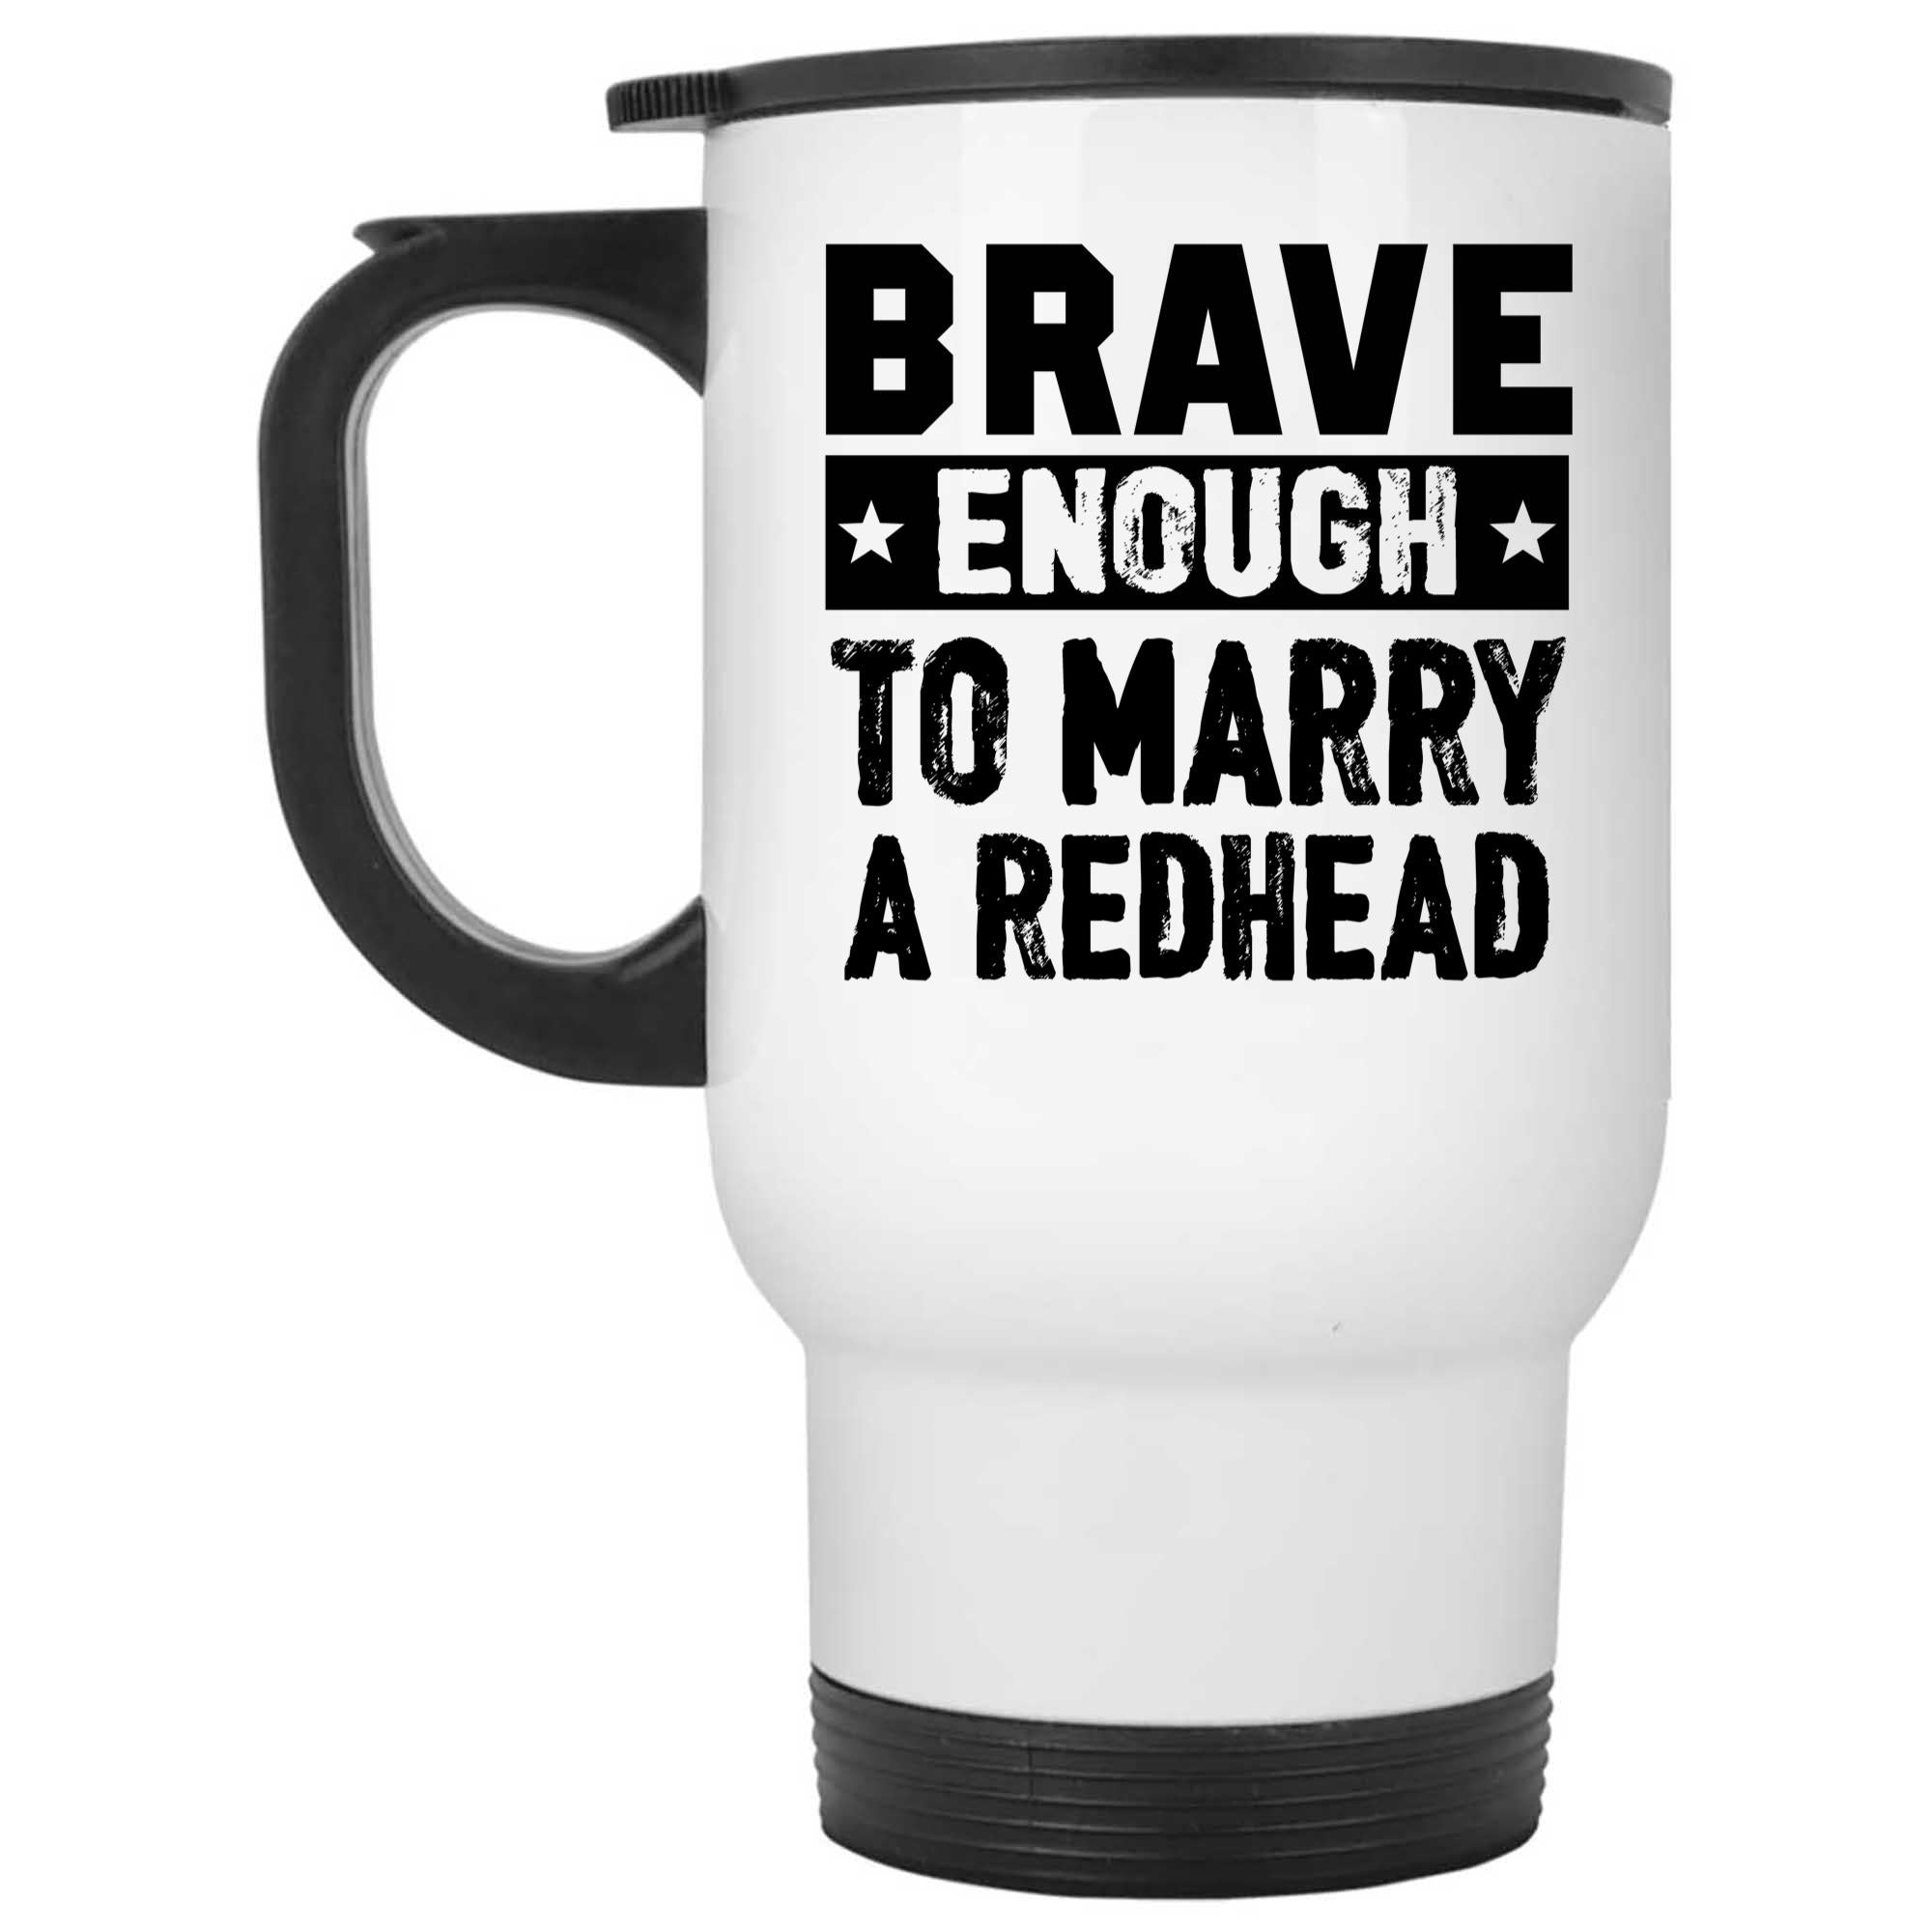 Skitongifts Funny Ceramic Novelty Coffee Mug Brave Enough To Marry A Redhead 4kpiBNW